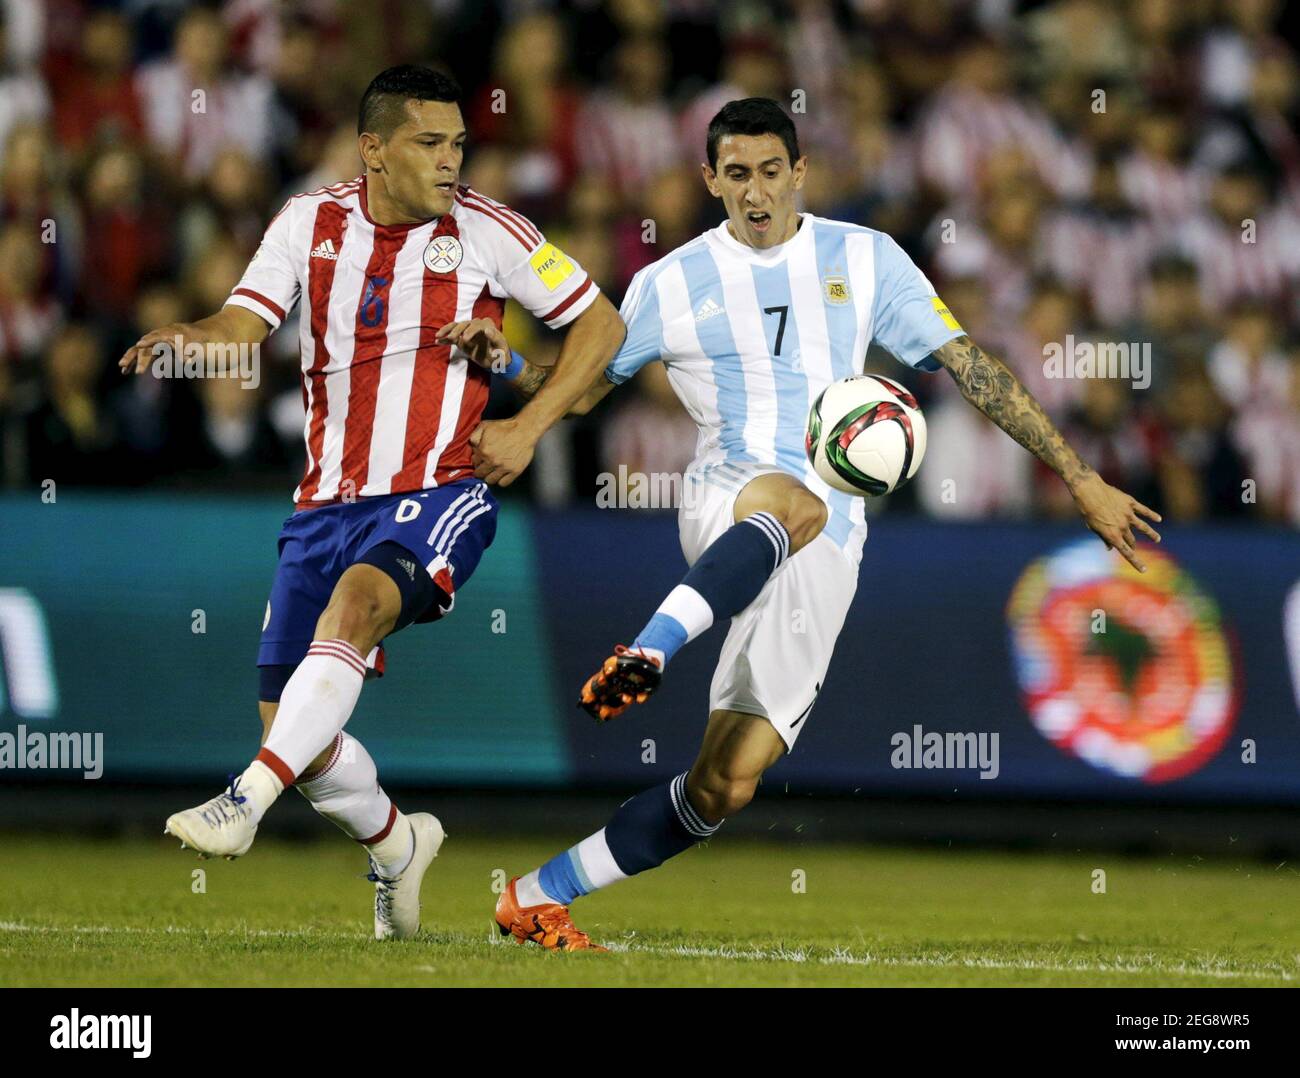 Argentina's Angel Di Maria (R) kicks the ball past Paraguay's Miguel Samudio during their 2018 World Cup qualifying soccer match at the Defensores del Chaco stadium in Asuncion, Paraguay, October 13, 2015.     REUTERS/Jorge Adorno    Picture Supplied by Action Images Stock Photo